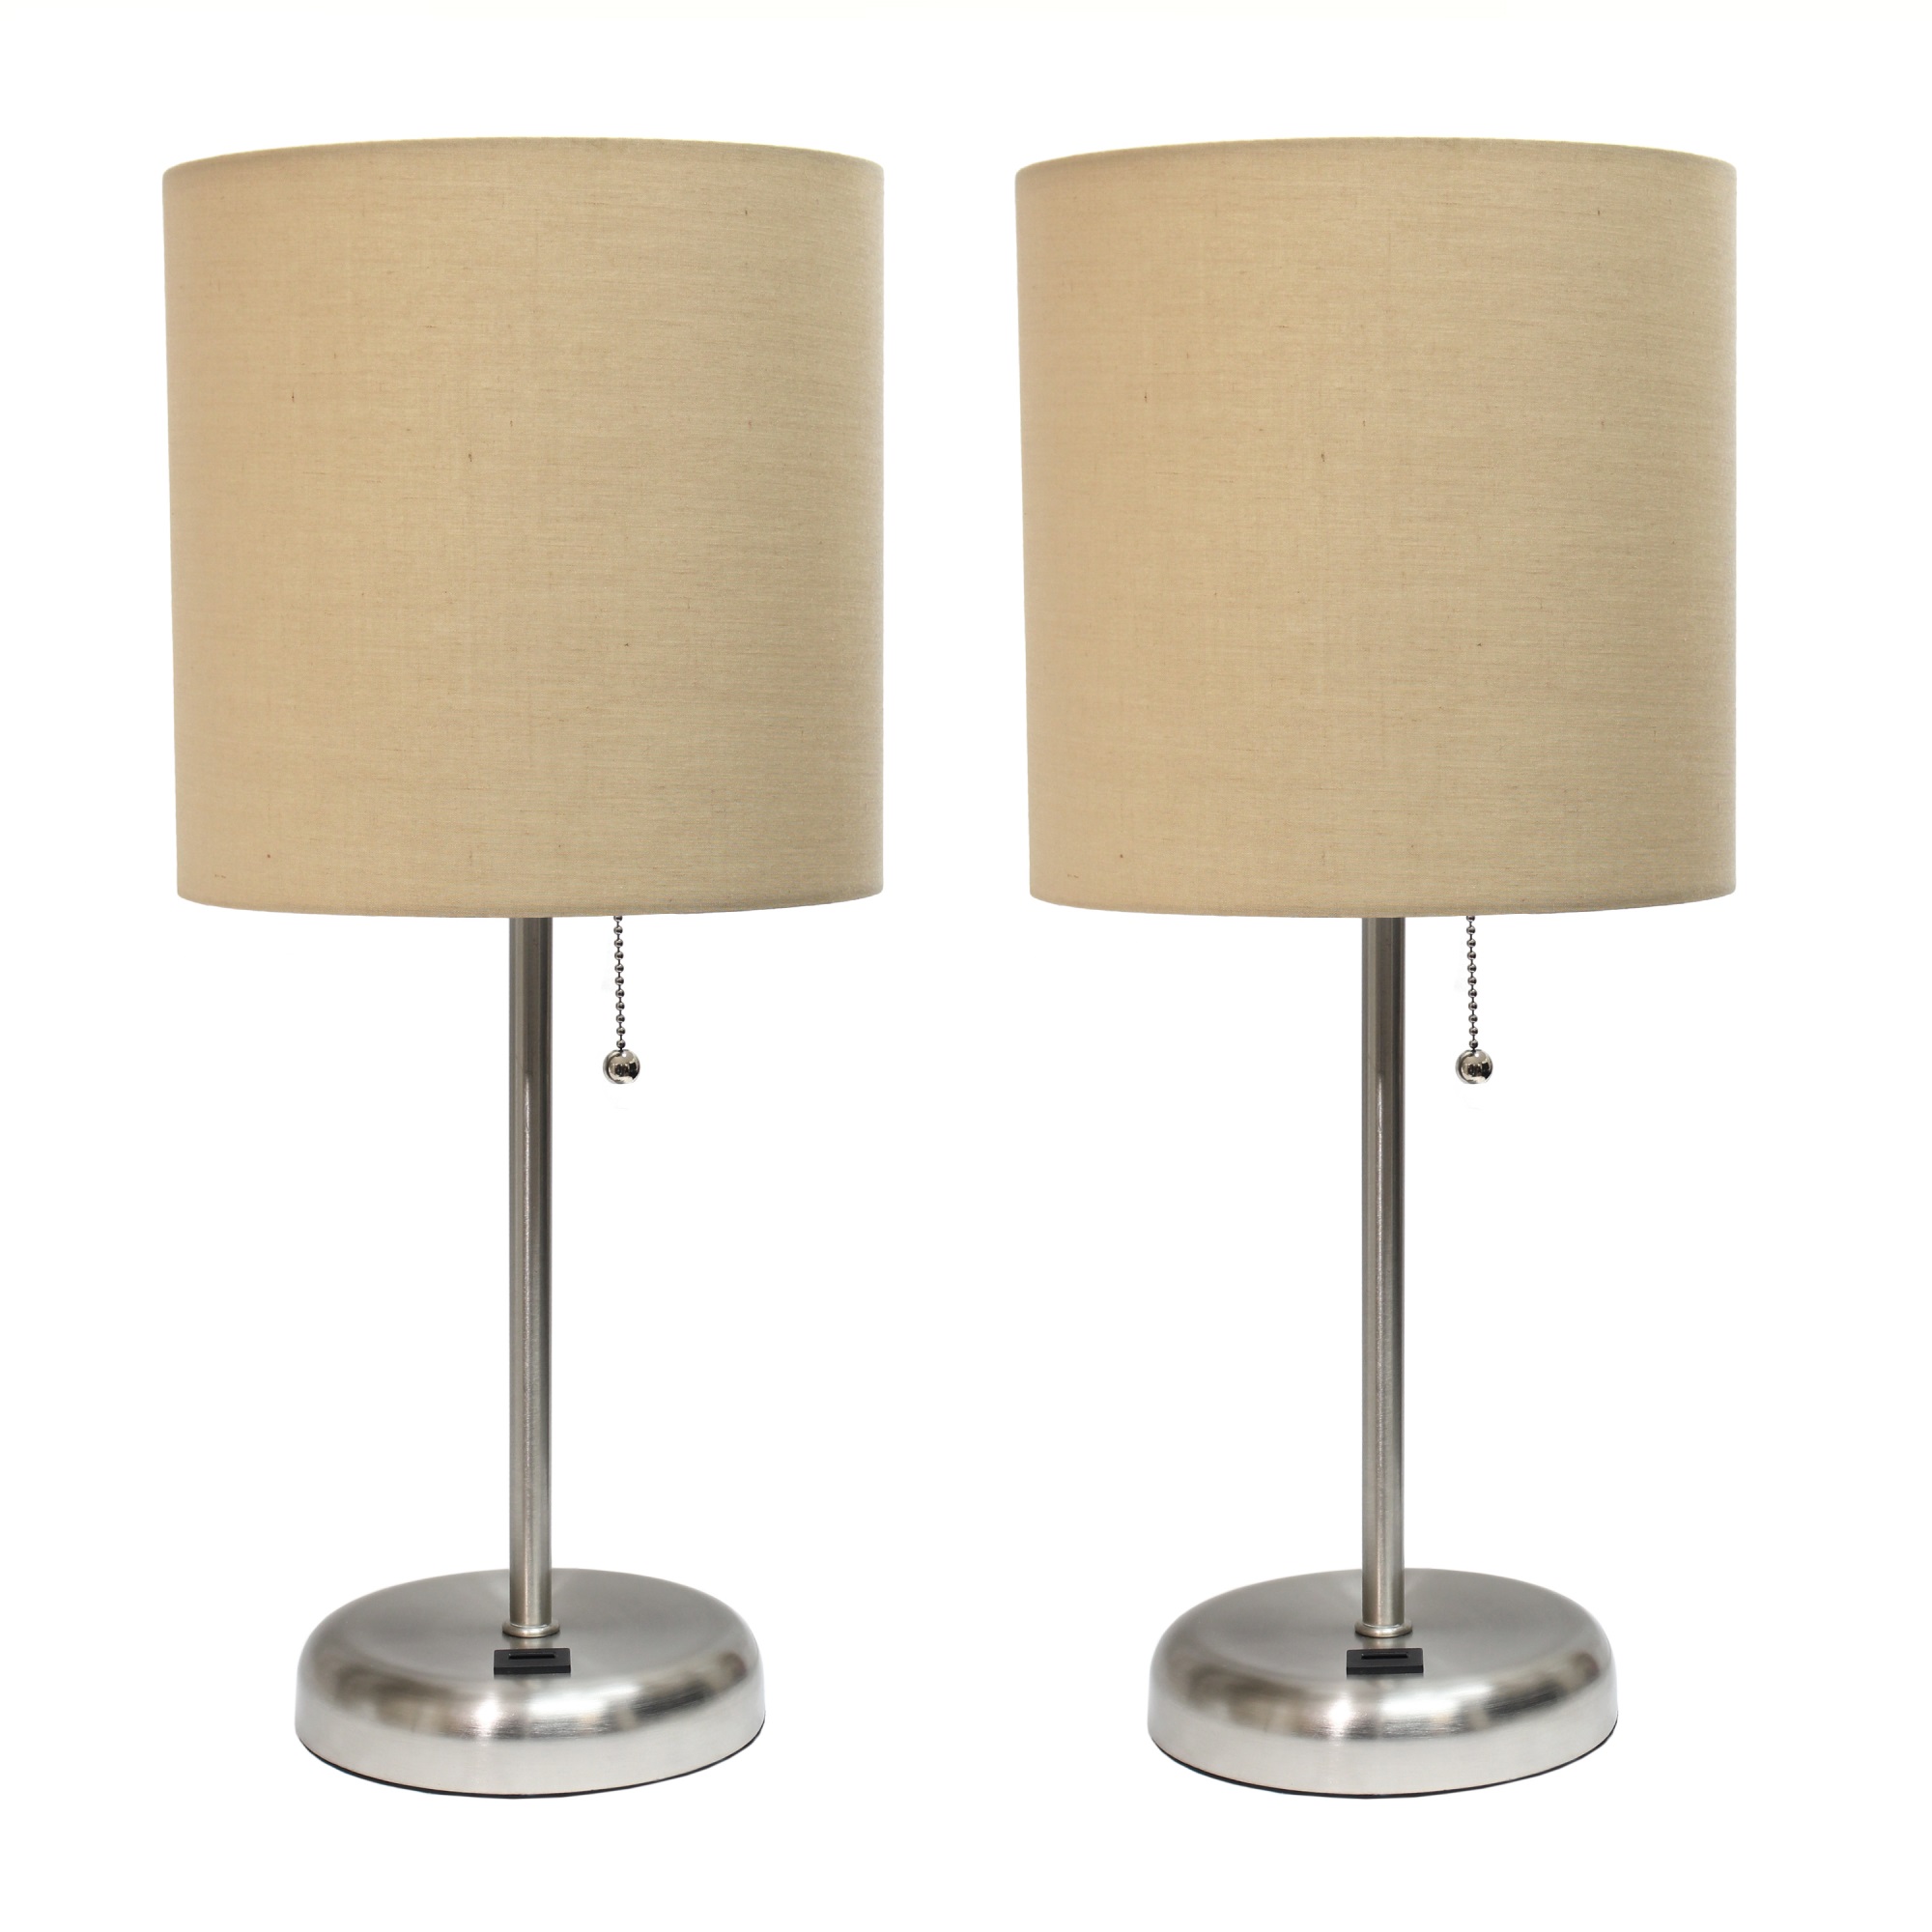 Limelights Stick Lamp with USB charging port and Fabric Shade 2 Pack Set, Tan